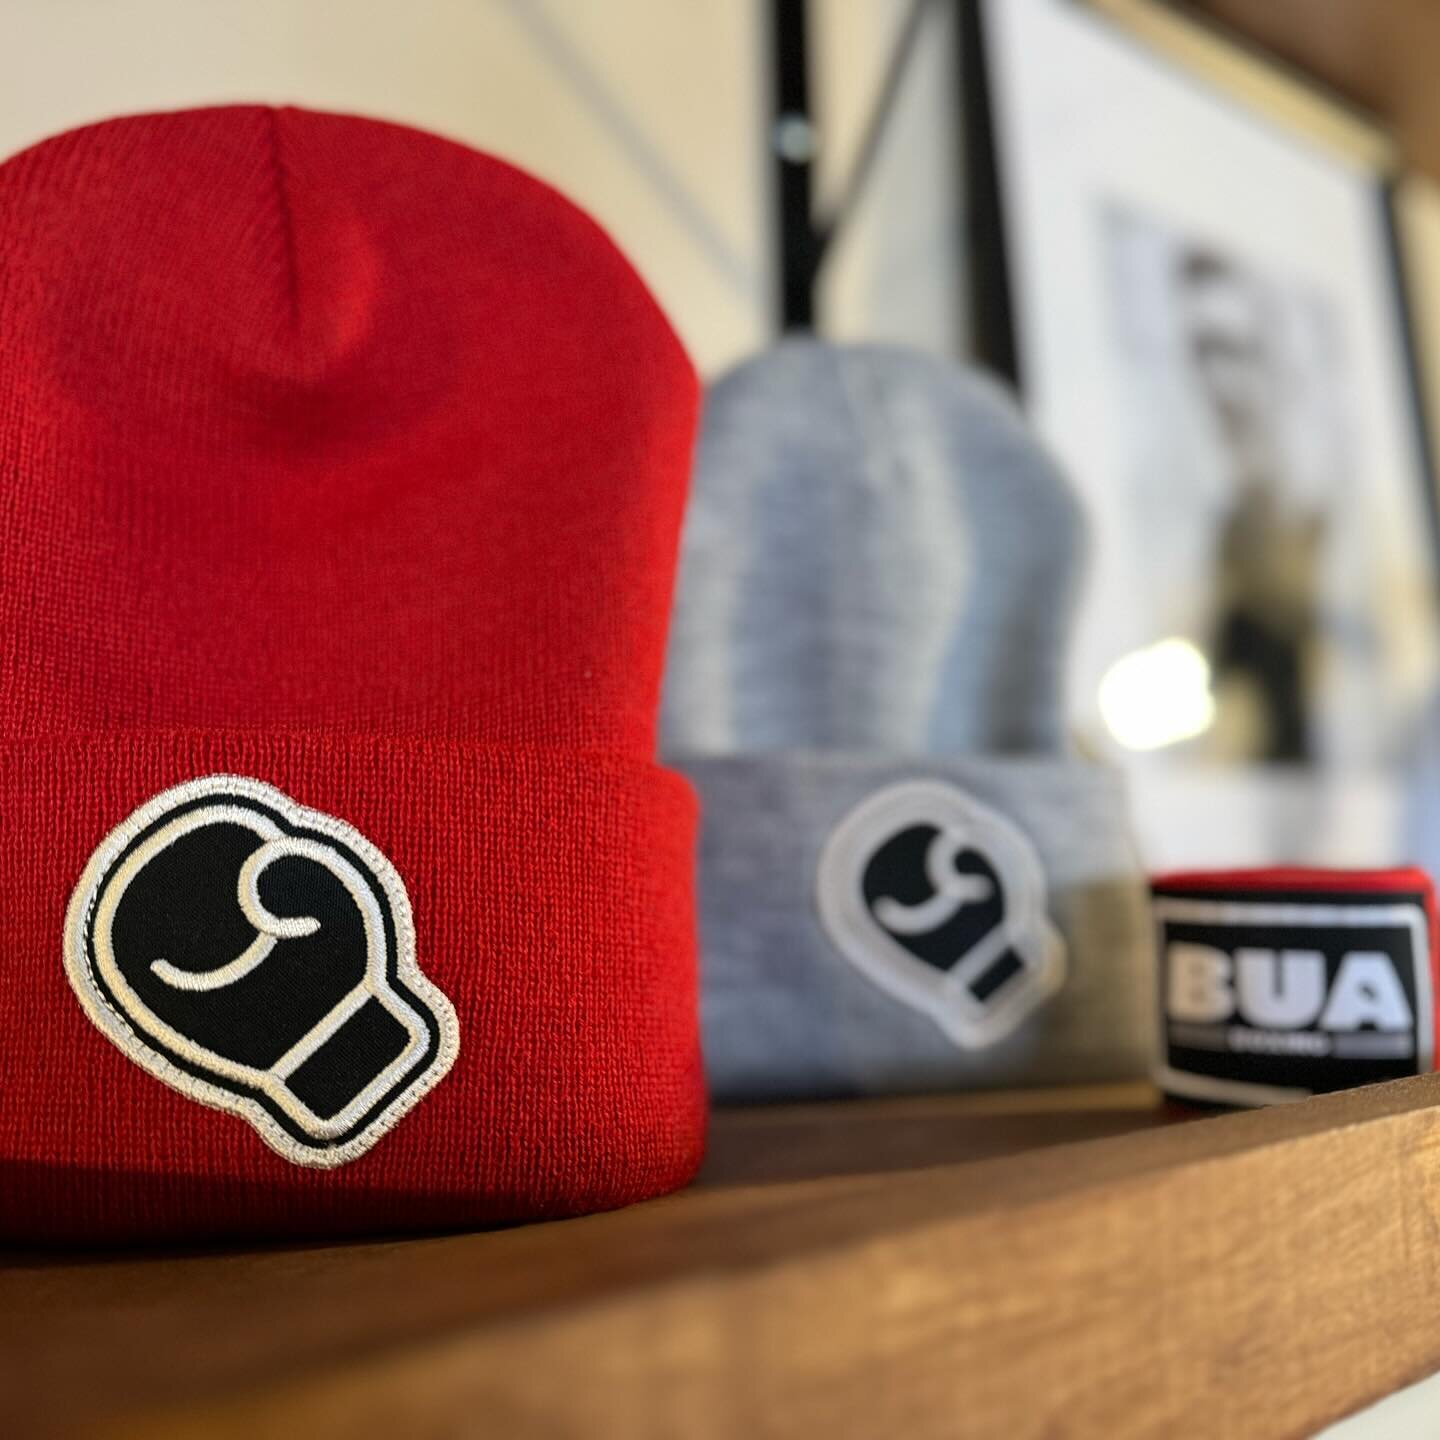 Beanies, hand wraps, boxing gloves, sweatshirts, and more are available on our website [buaboxing.com/shop]